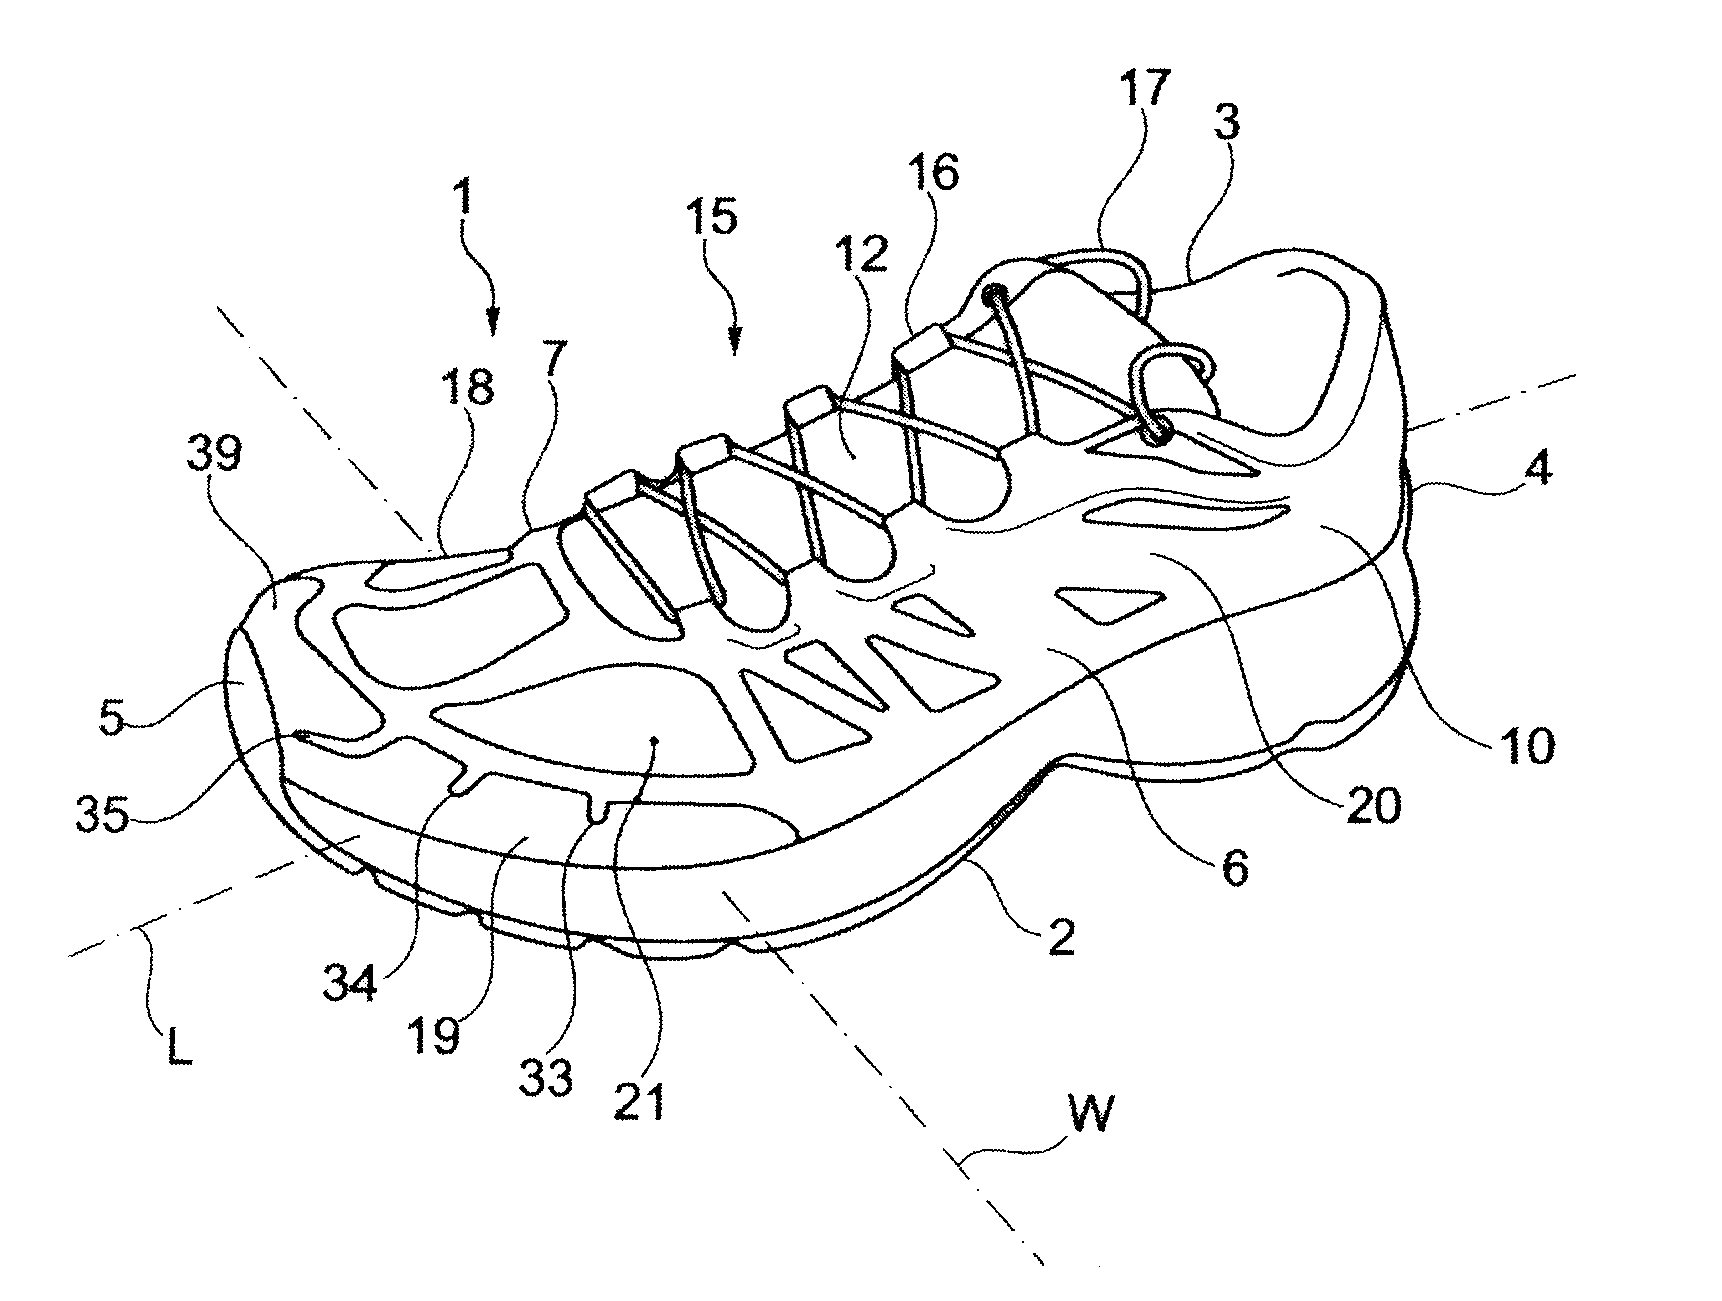 Shoe with improved structure